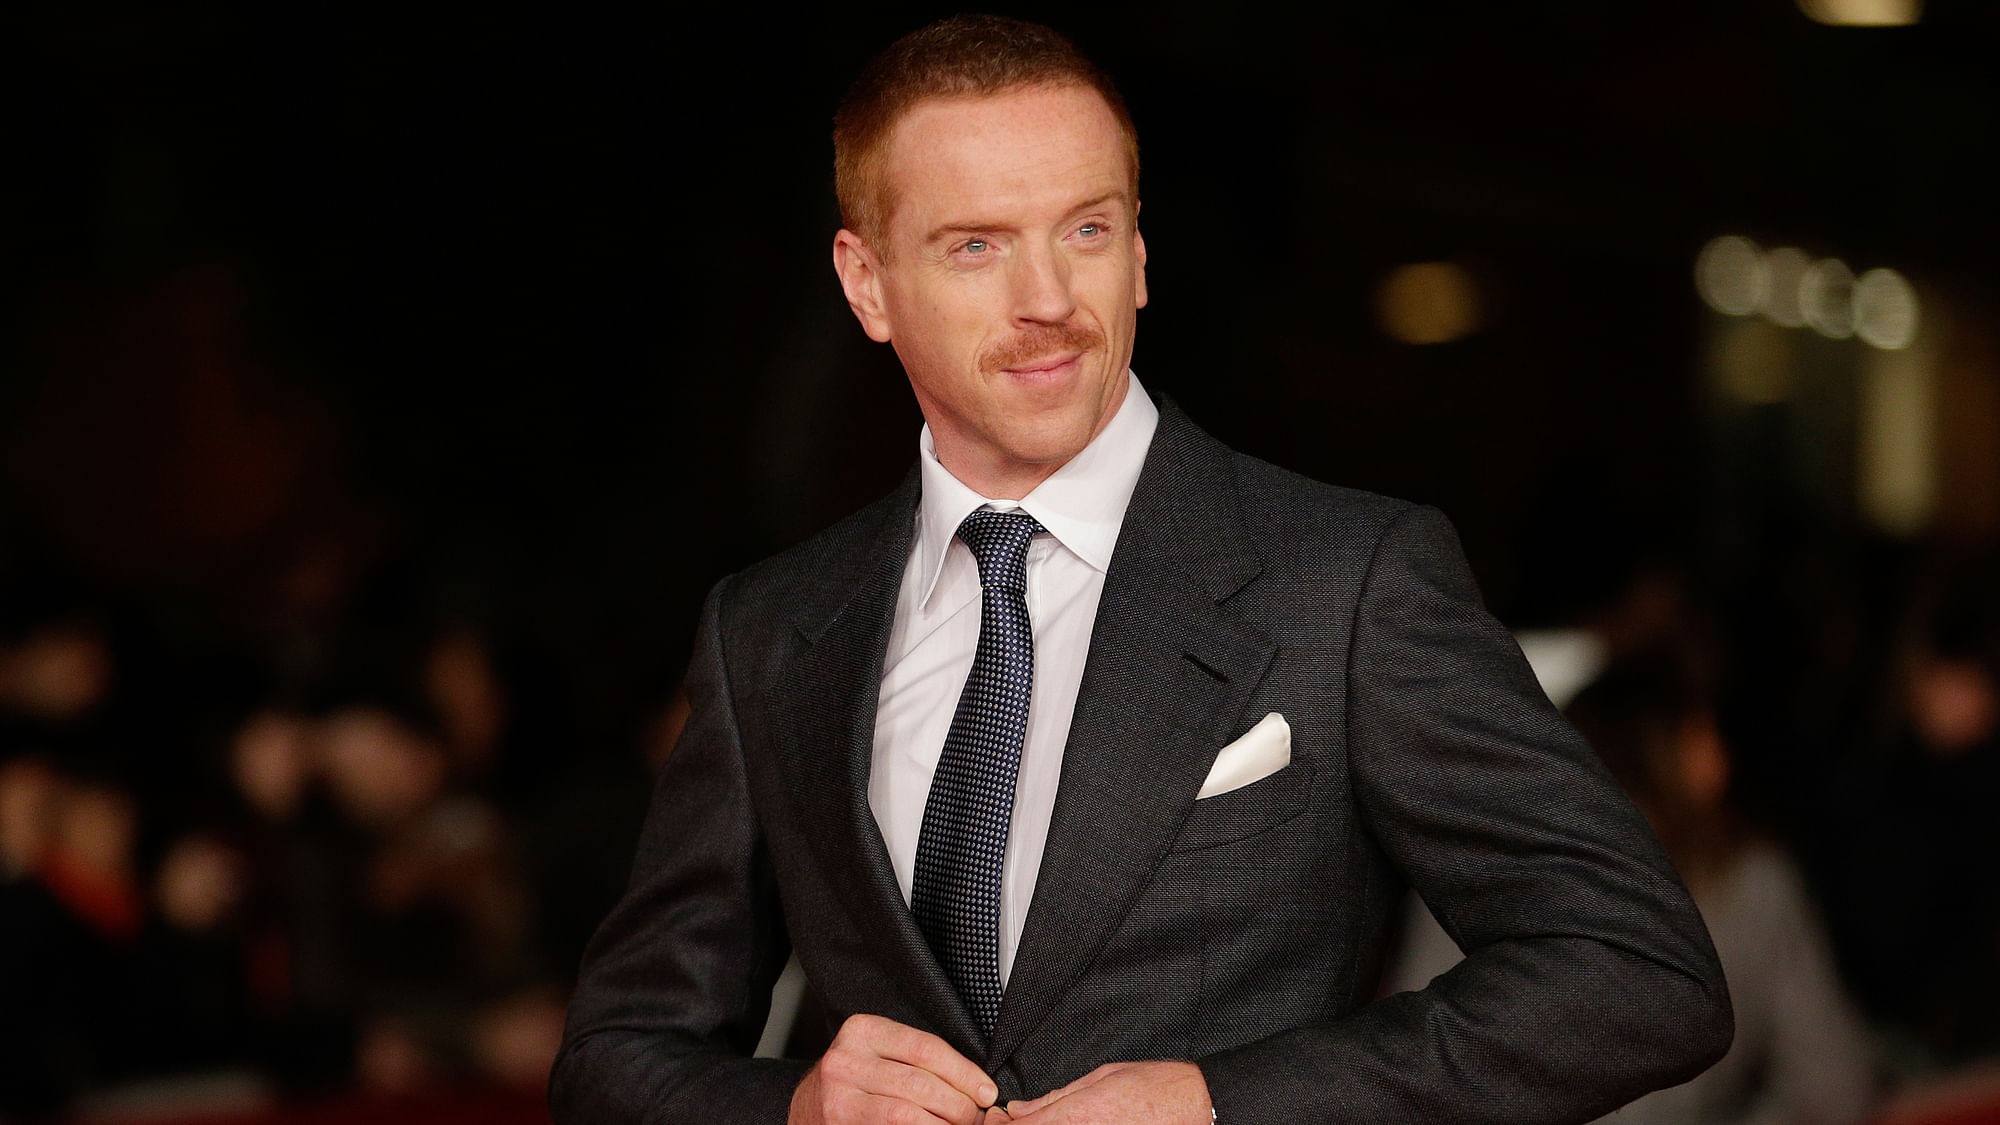 Popular TV series Homeland star Damian Lewis could be the next James Bond after Daniel Craig steps down. (Photo: Reuters)